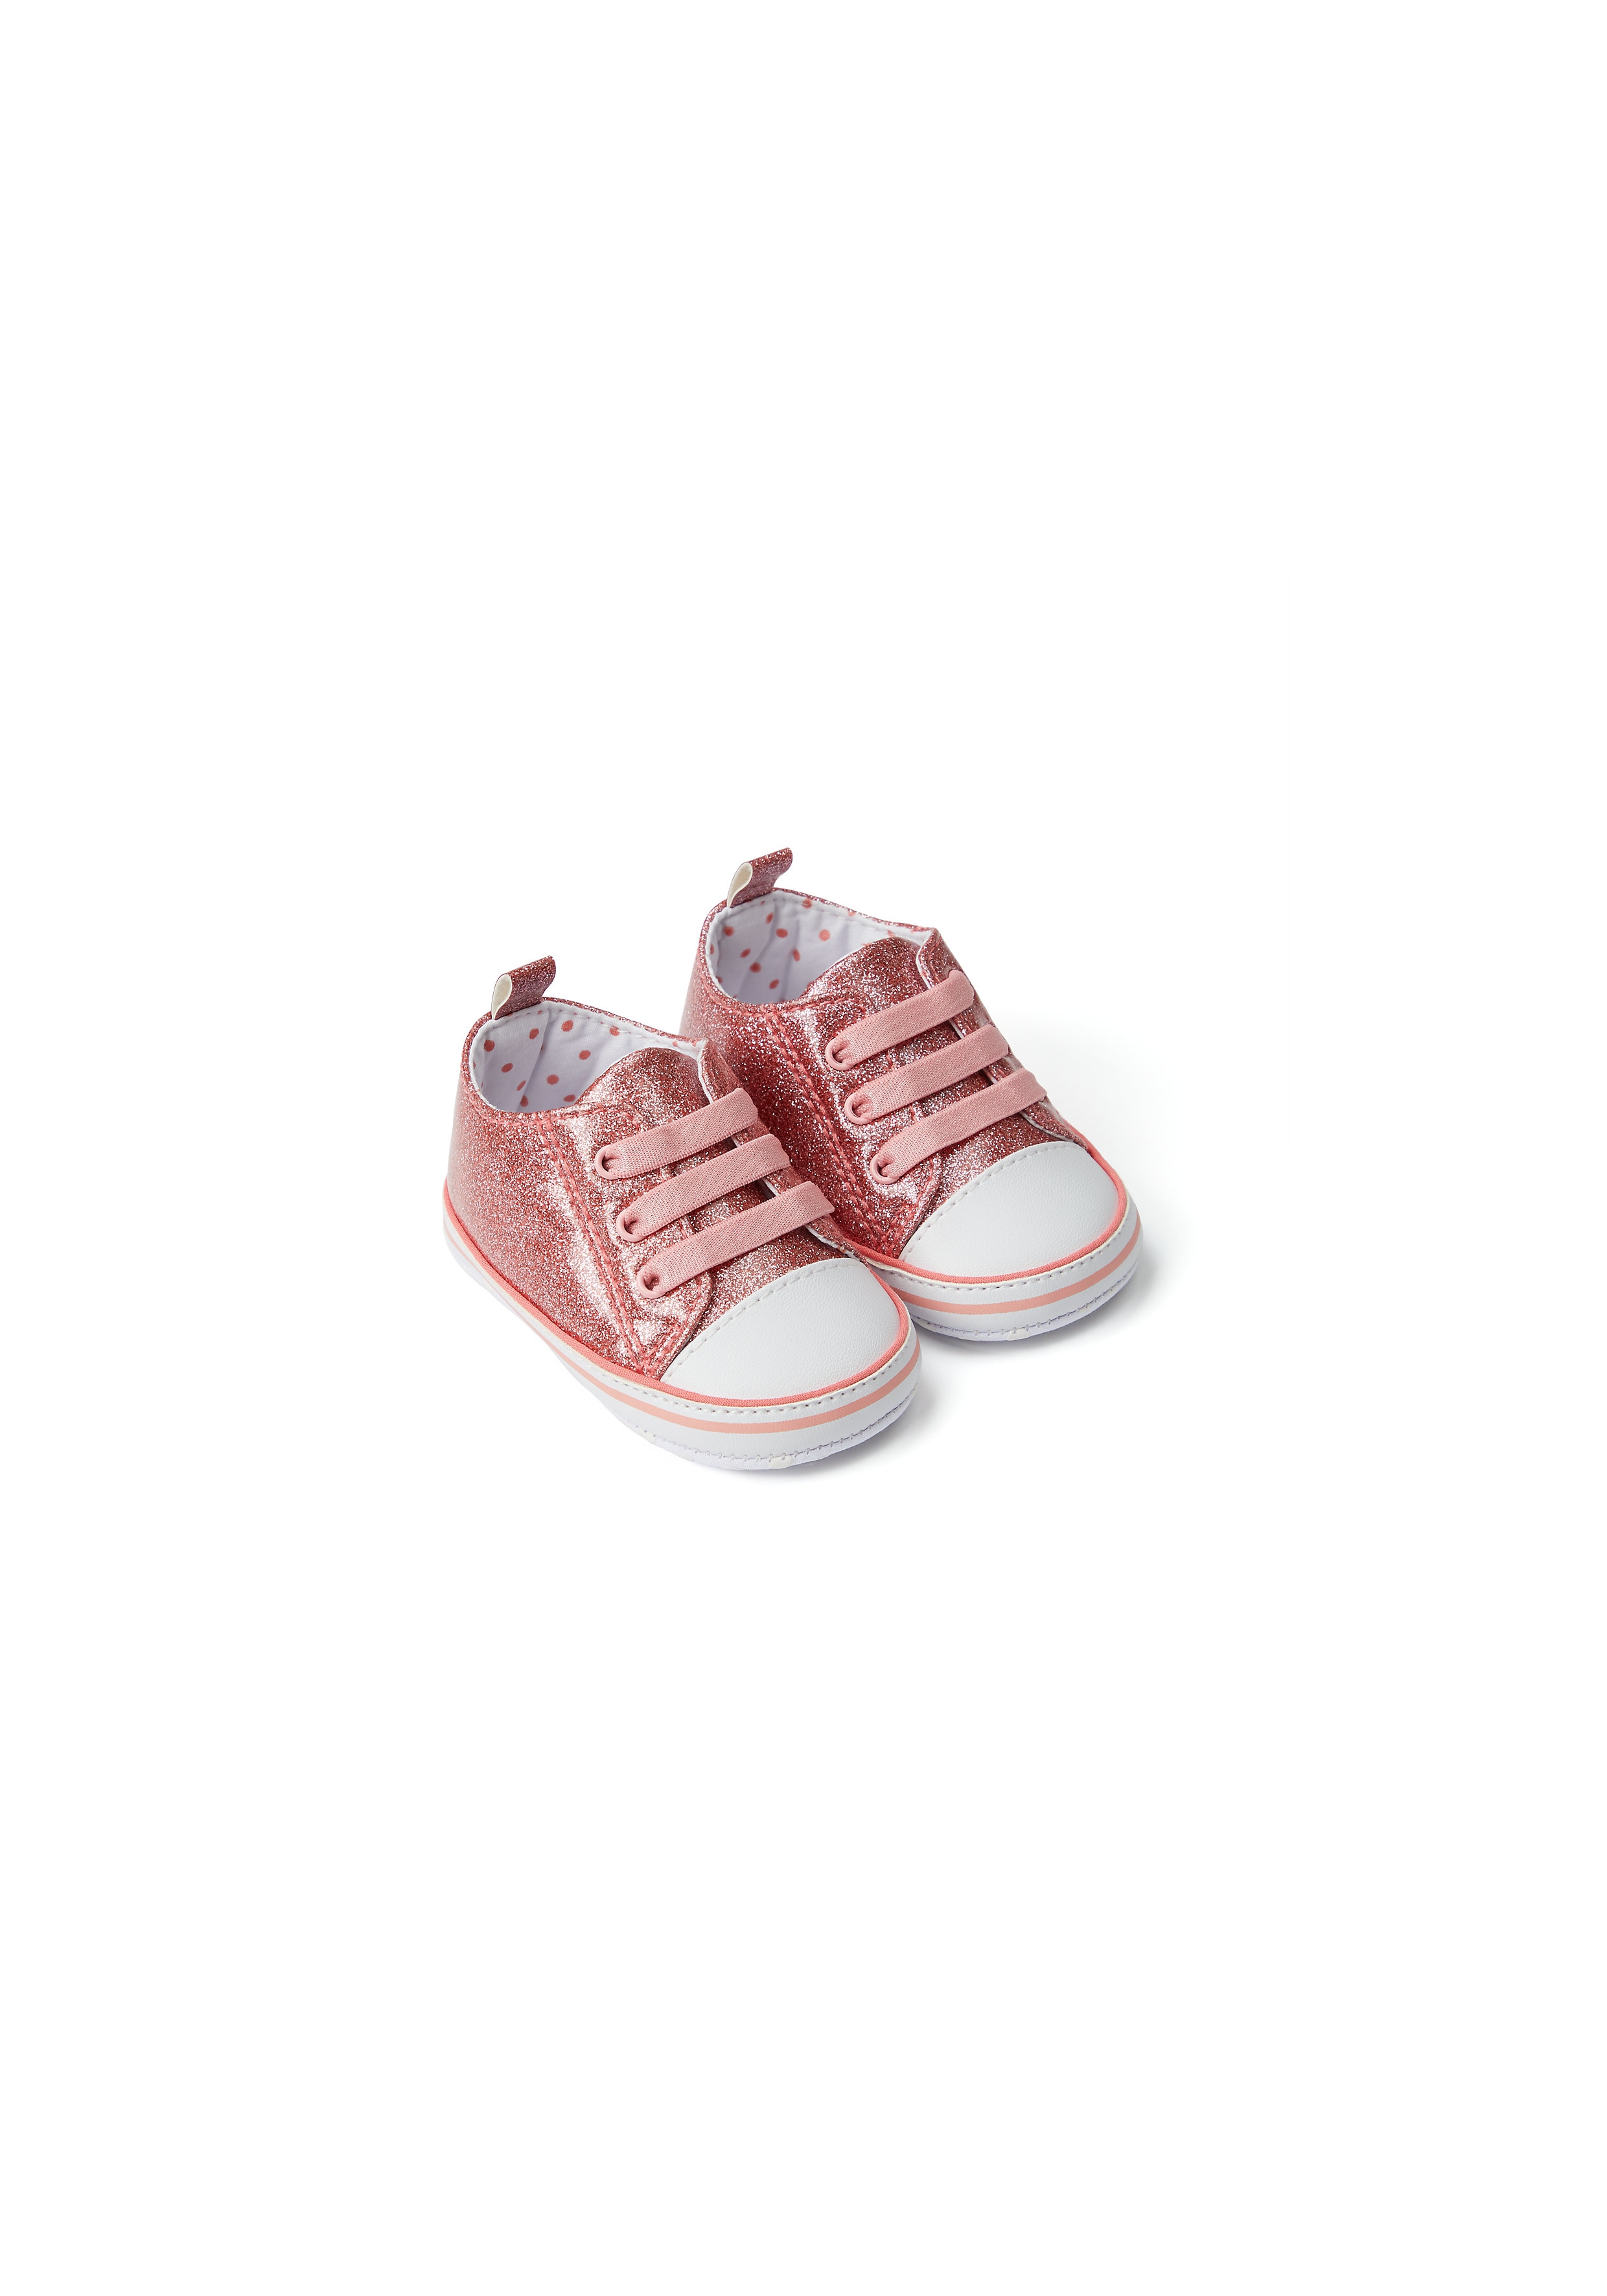 Mothercare | Girls Glitter Pram Shoes  - Coral